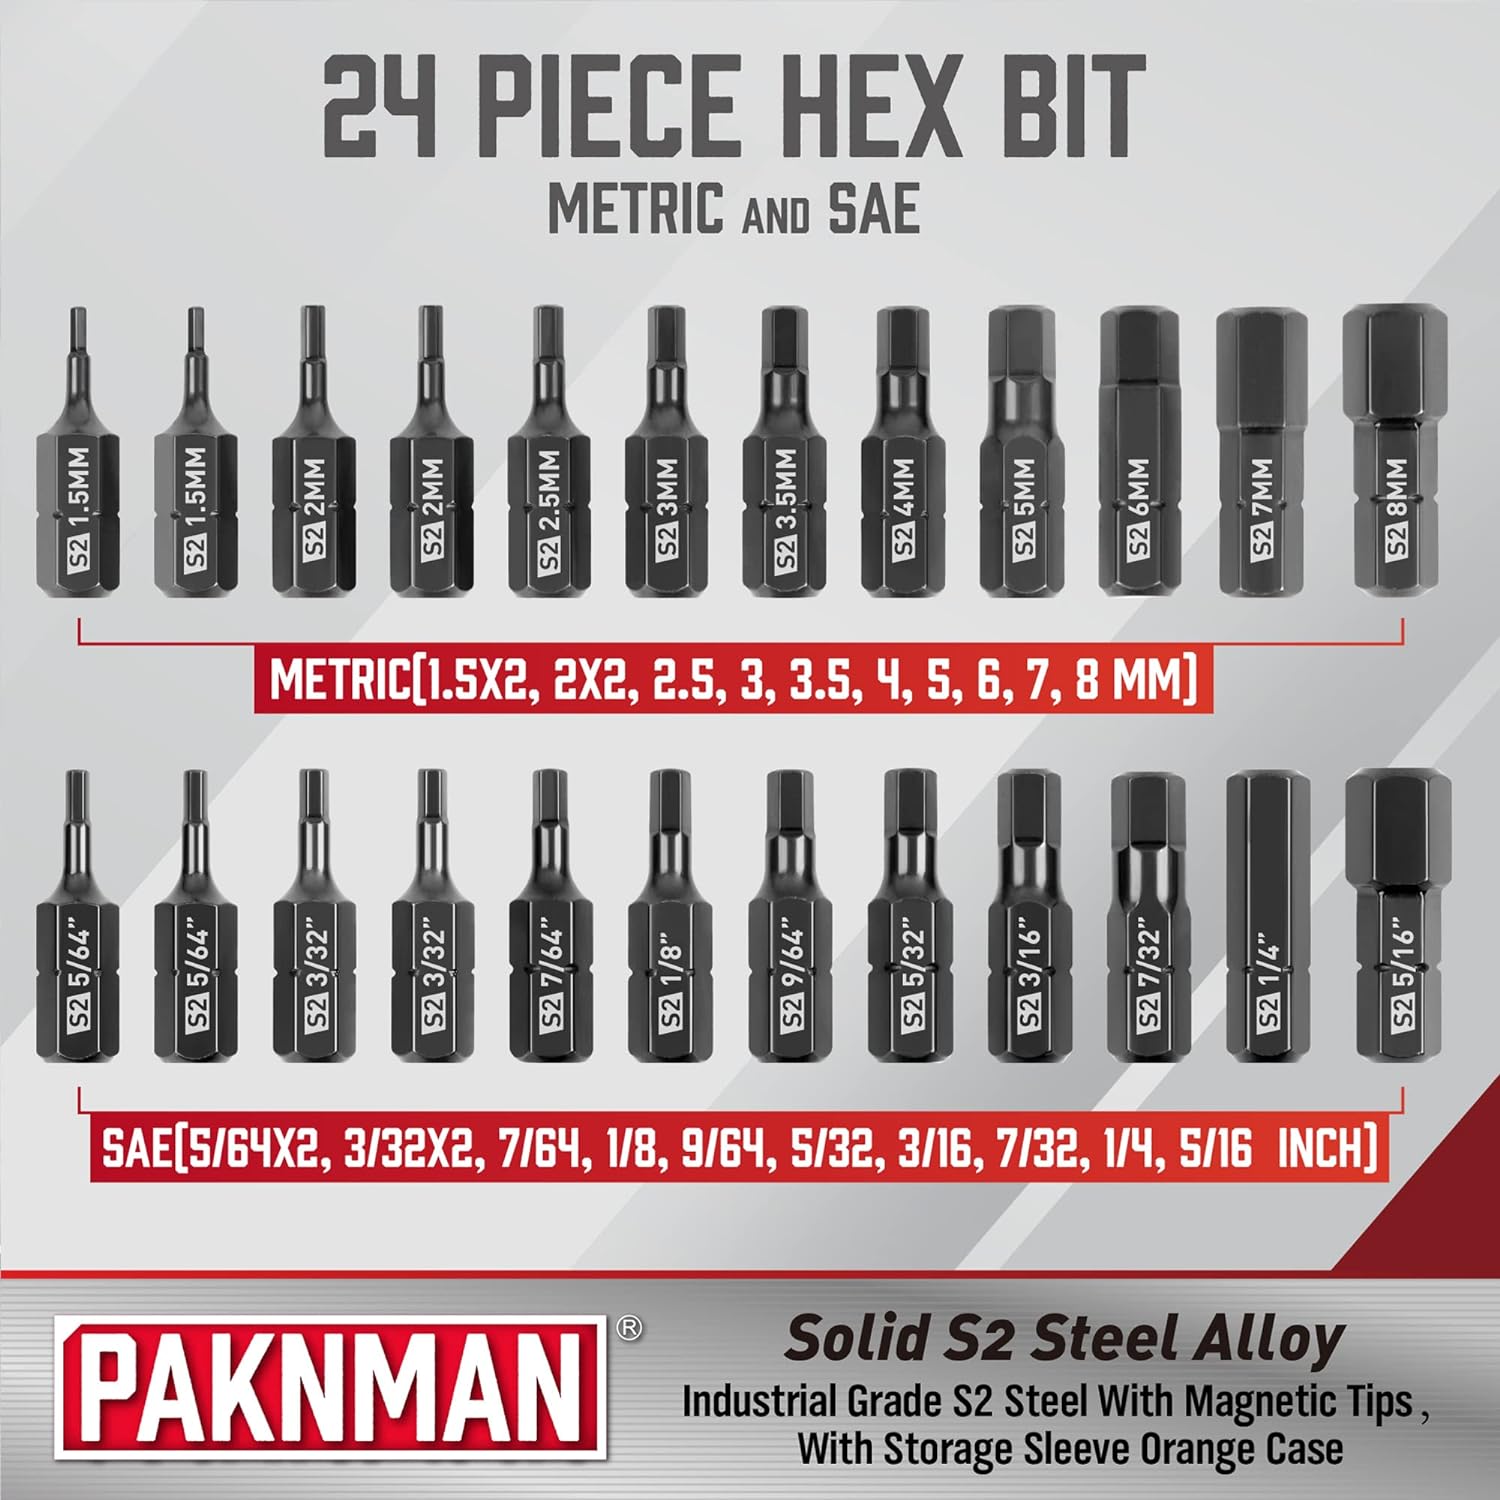 PAKNMAN 25-Piece Hex Head Allen Wrench Drill Bit Set, 1/4”Magnetic Extension, Metric and SAE S2 Steel Hex Bits Set, 1" Long